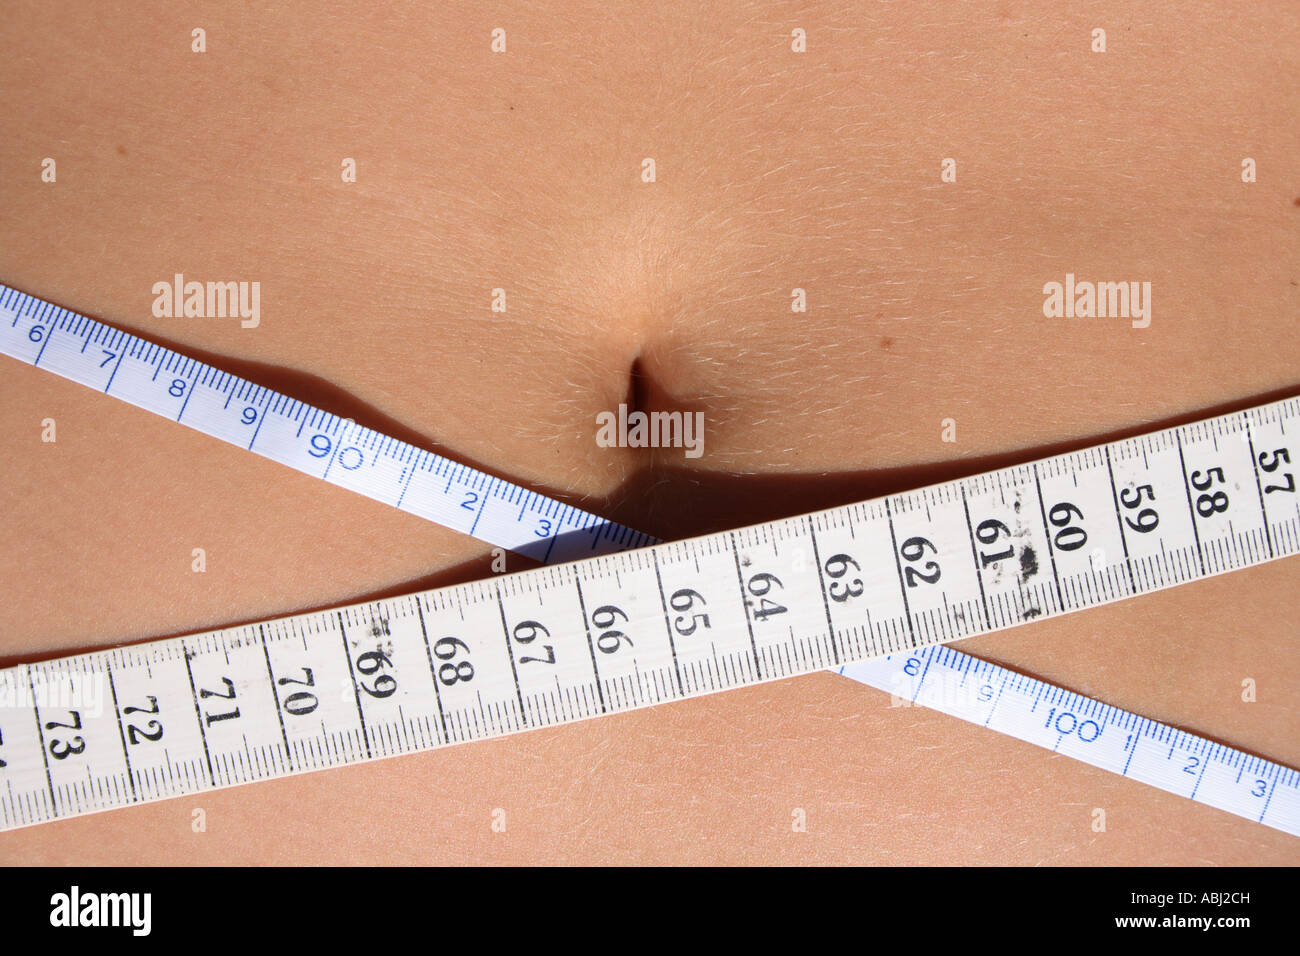 belly of a young woman measuring waist. Measuring tape INCH and CM